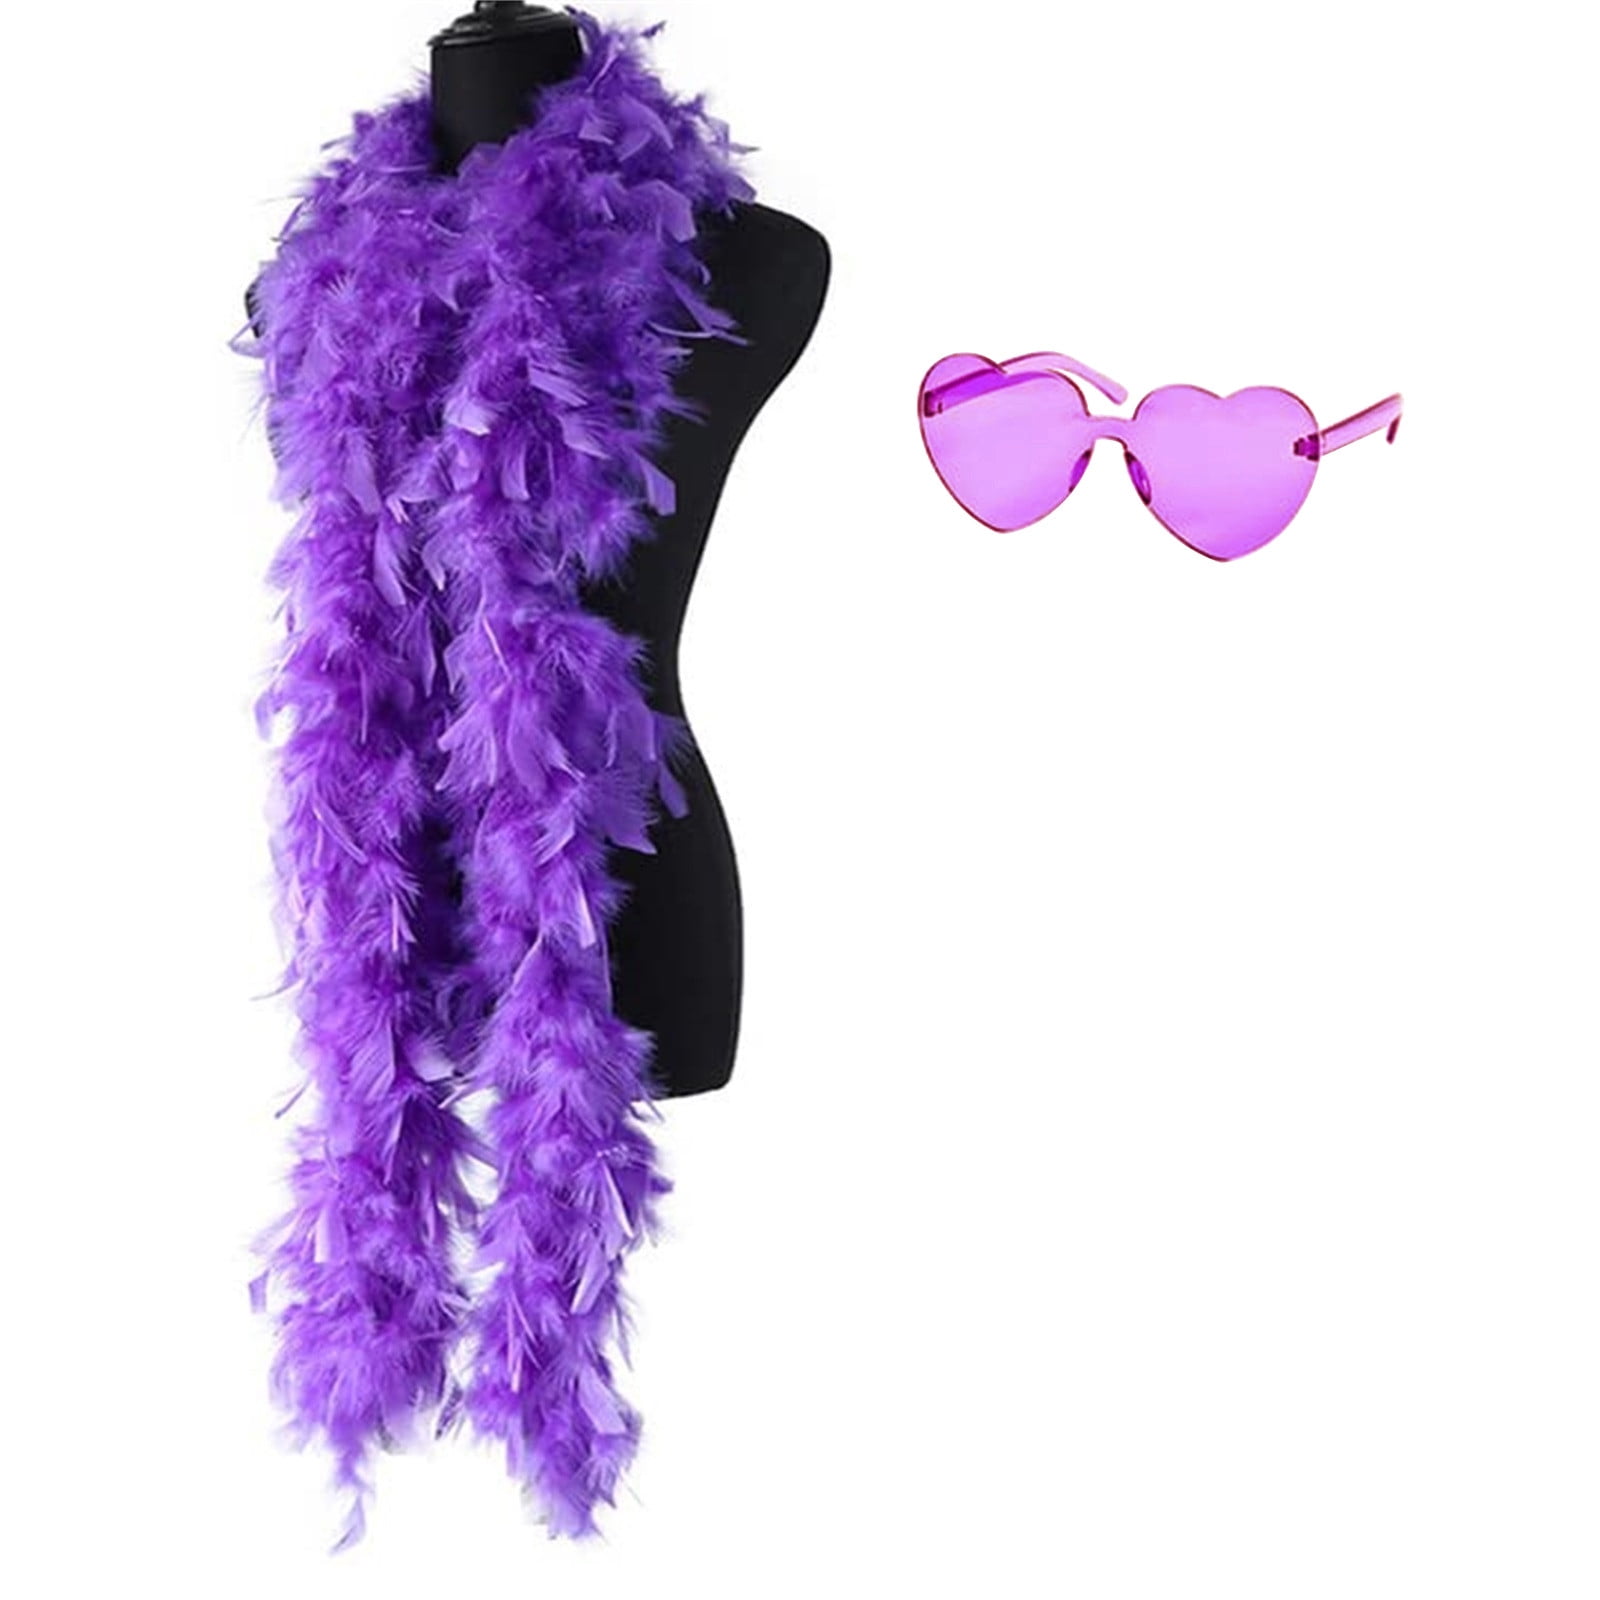 Gasue Fall Decorations for Home, Feather Boas with Heart Rimless Sunglasses - 2m/6.6ft Feather Boa for Women - Ideal for Dancing, Wedding, Party